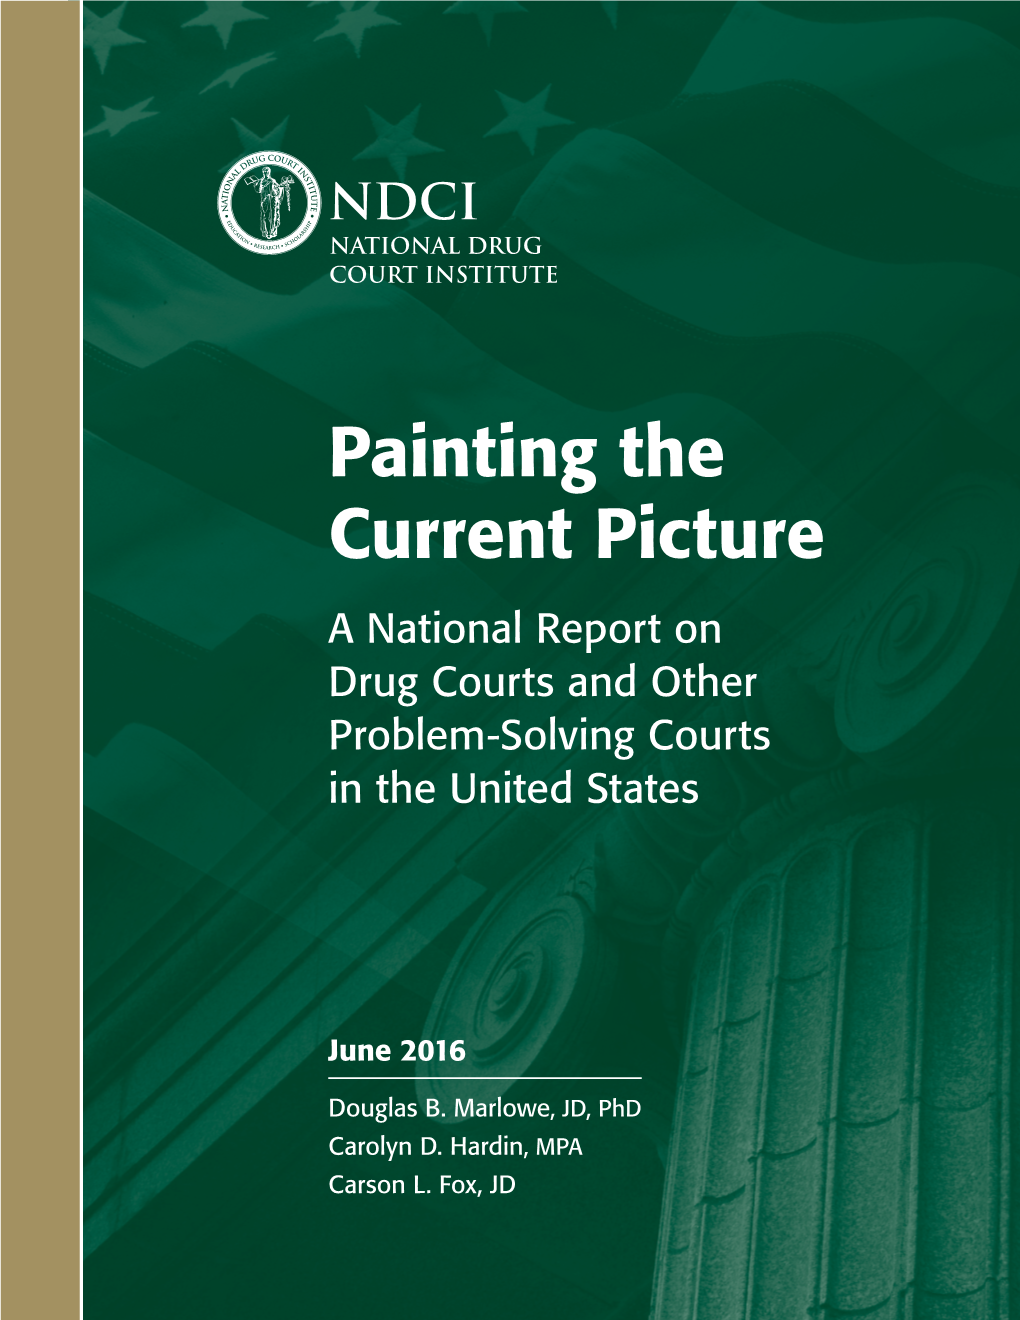 Painting the Current Picture a National Report on Drug Courts and Other Problem-Solving Courts in the United States